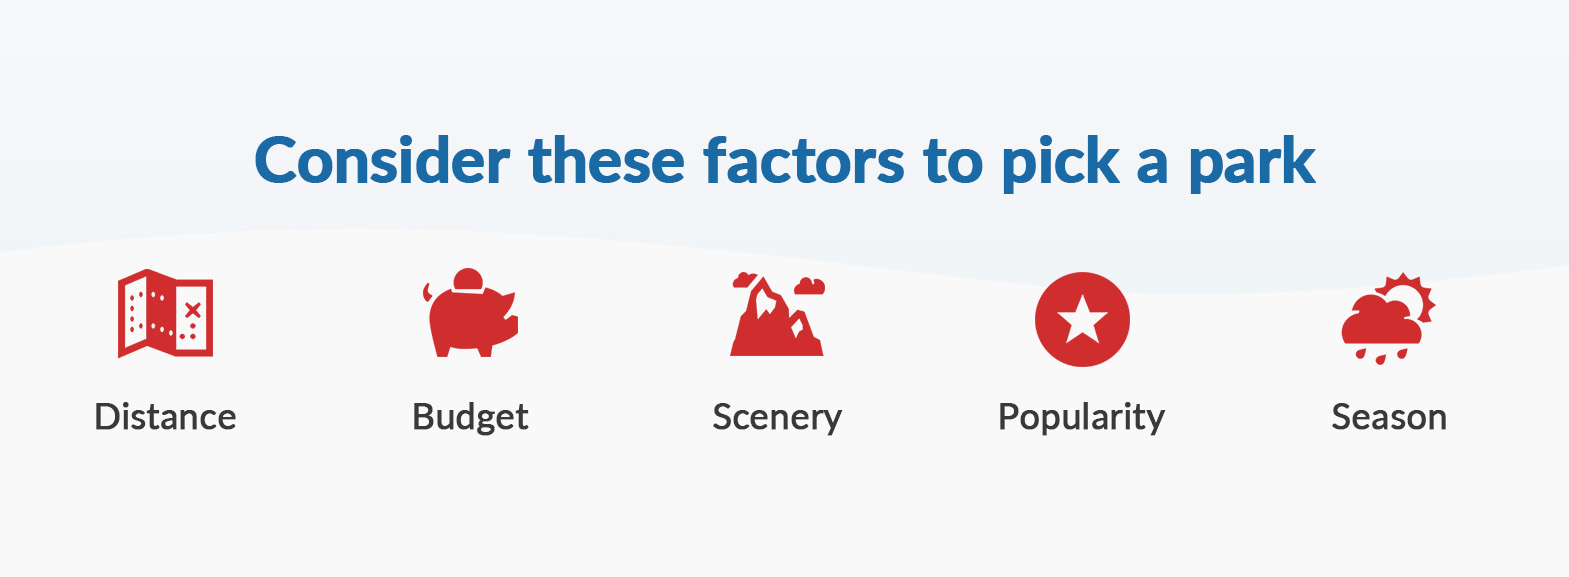 Consider these factors to pick a park